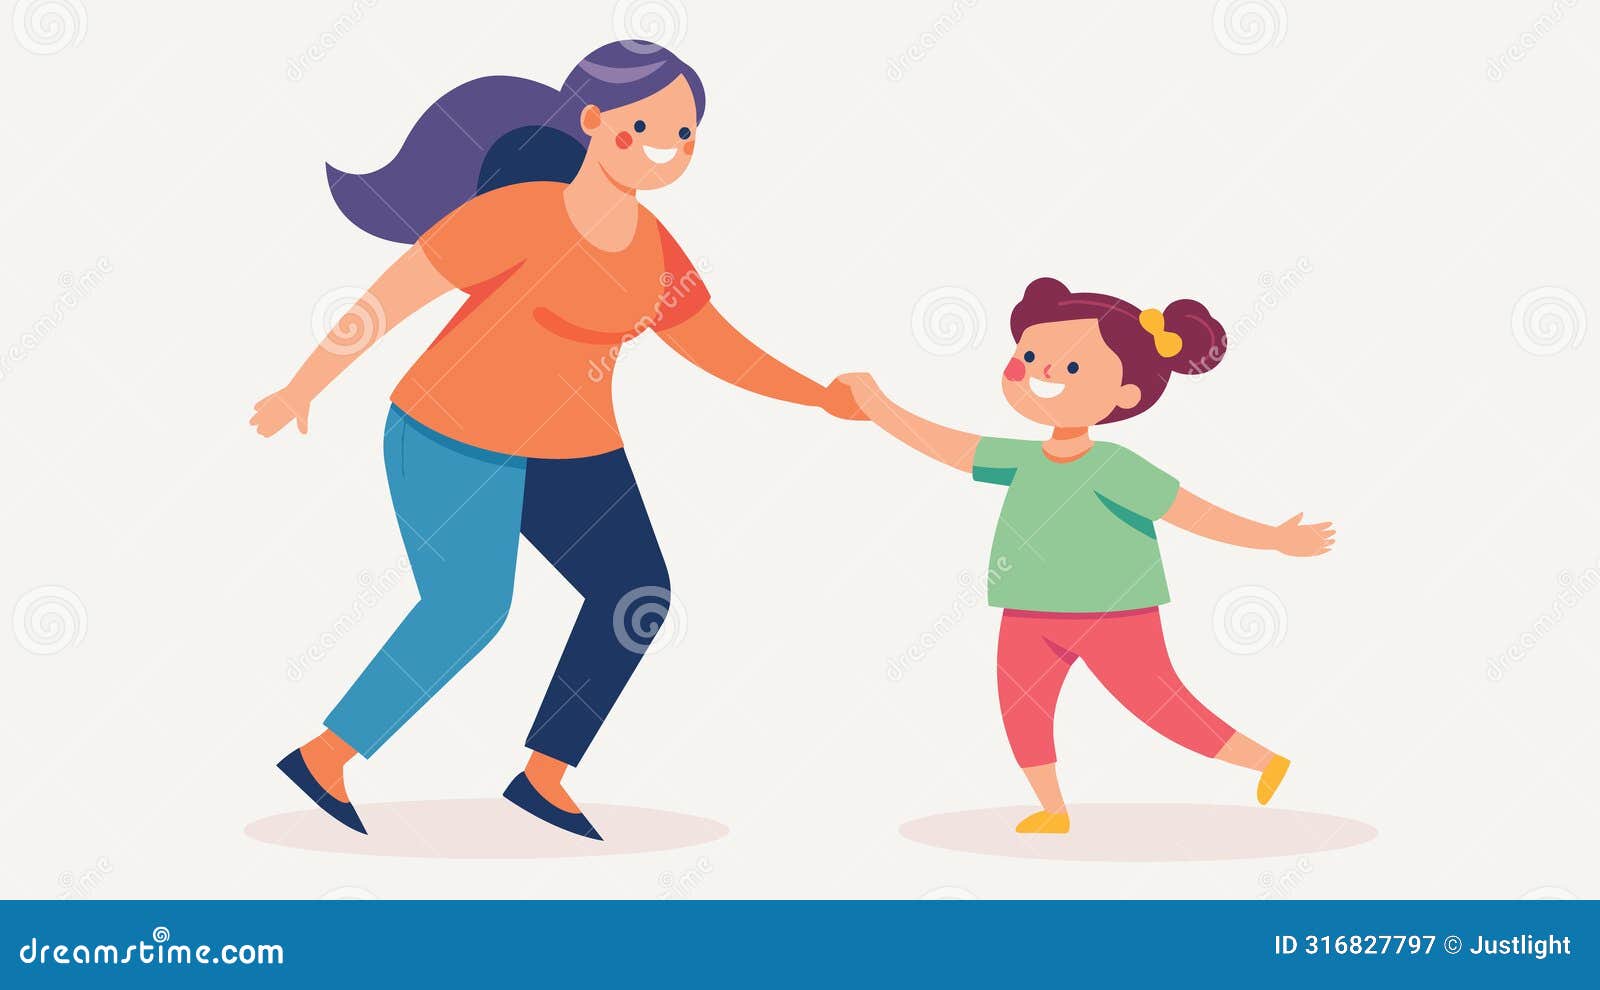 a mother and daughter hold hands and laugh while attempting a line dance expressing the importance of instilling body